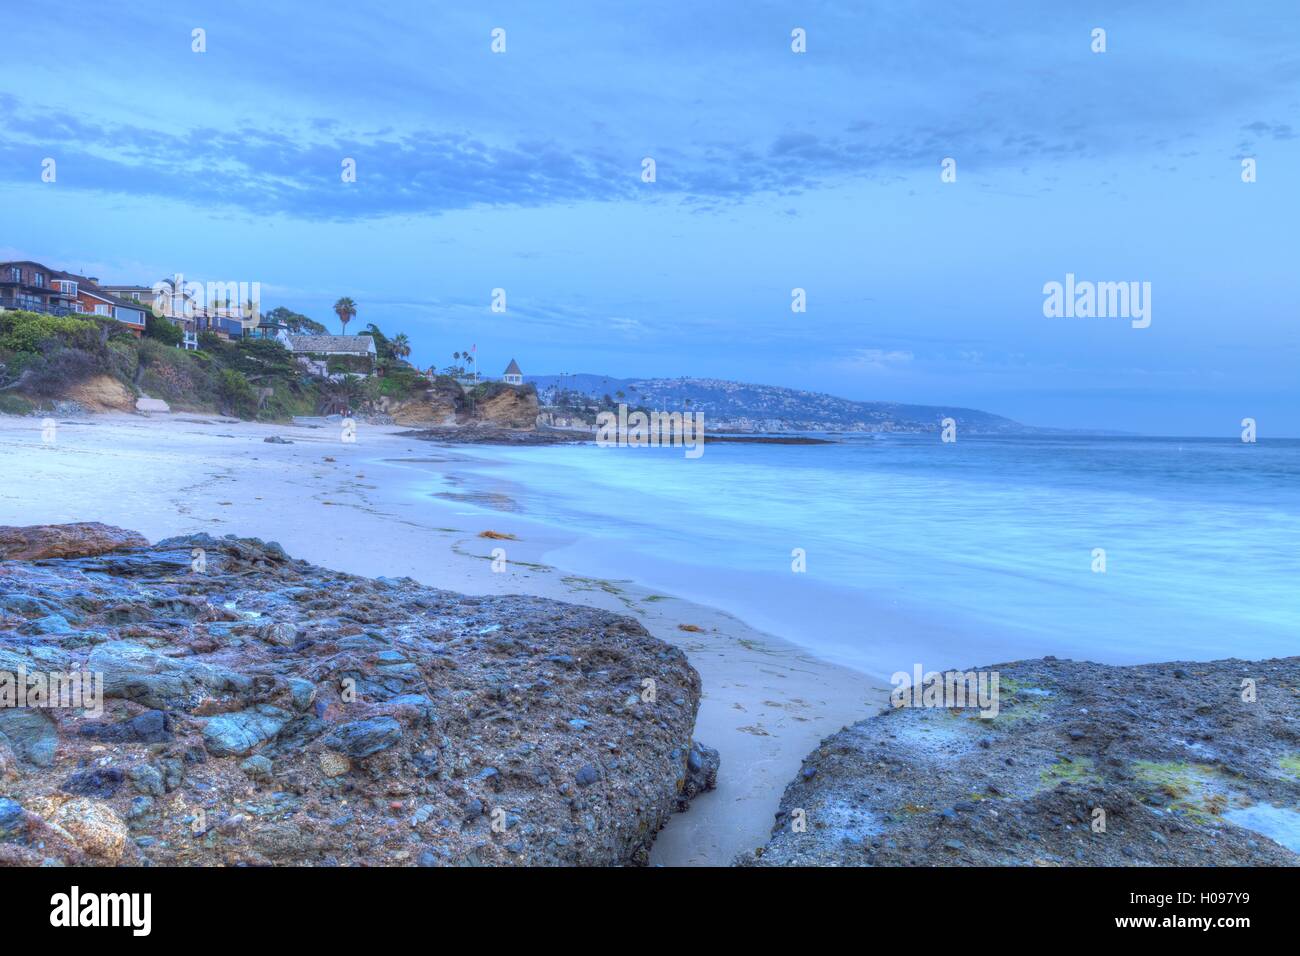 Sunset over the rocks at Shaws Cove in Laguna Beach as water flows over the stone in HDR Stock Photo